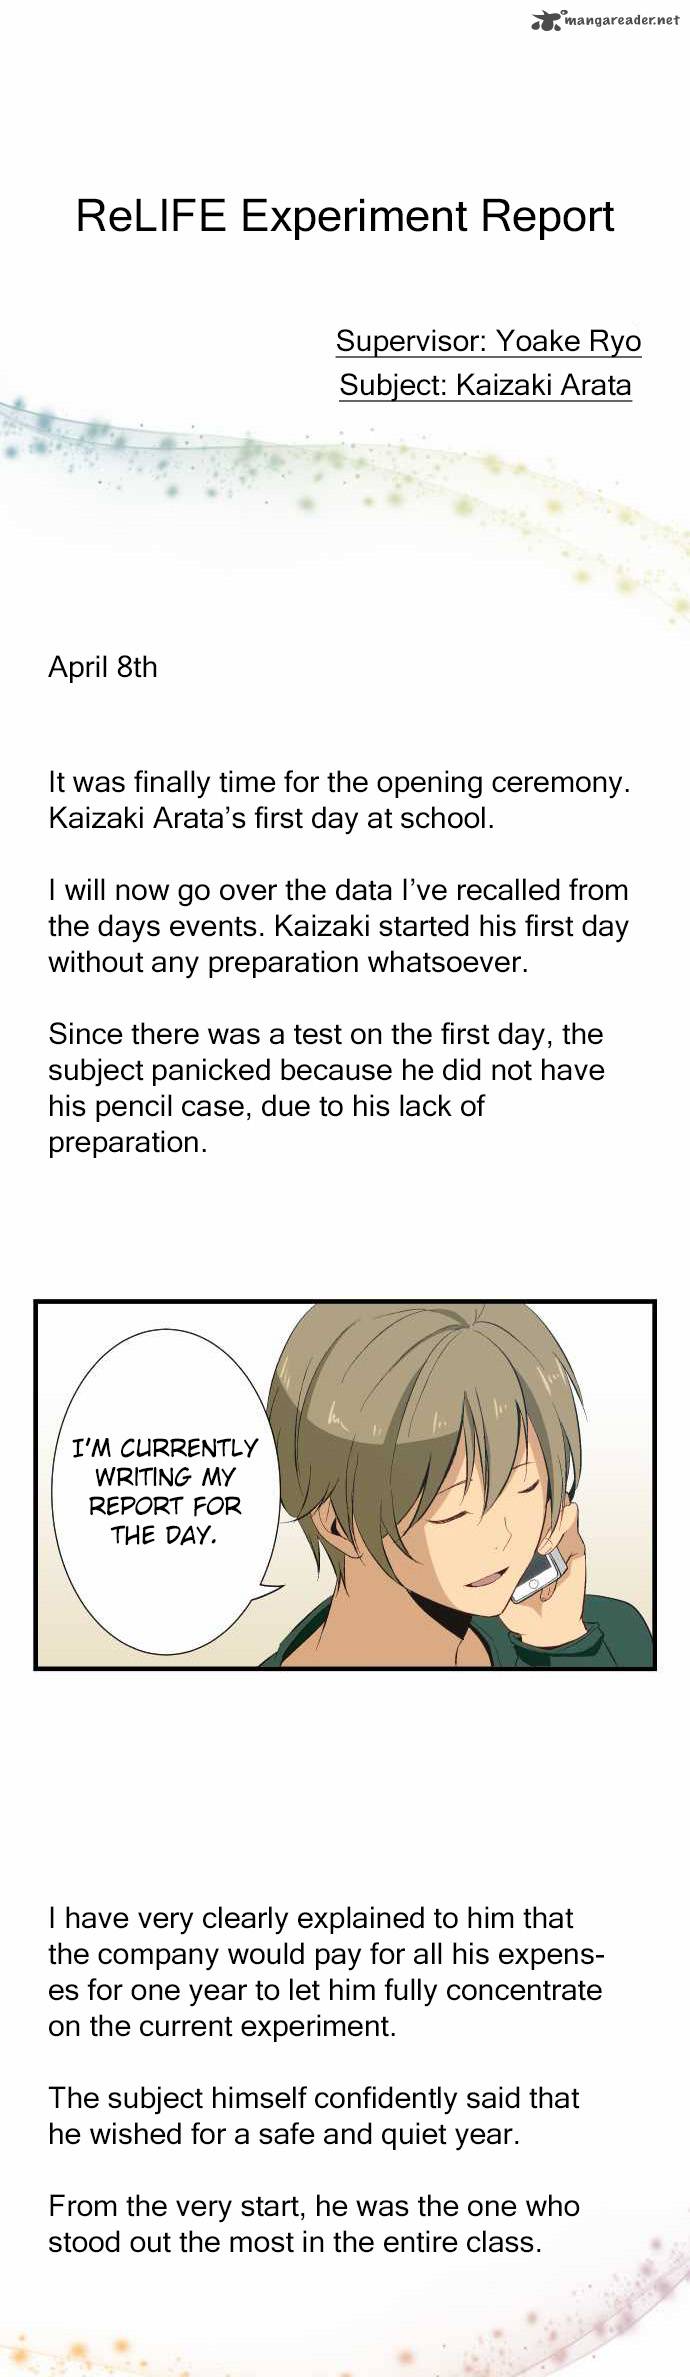 relife_19_11